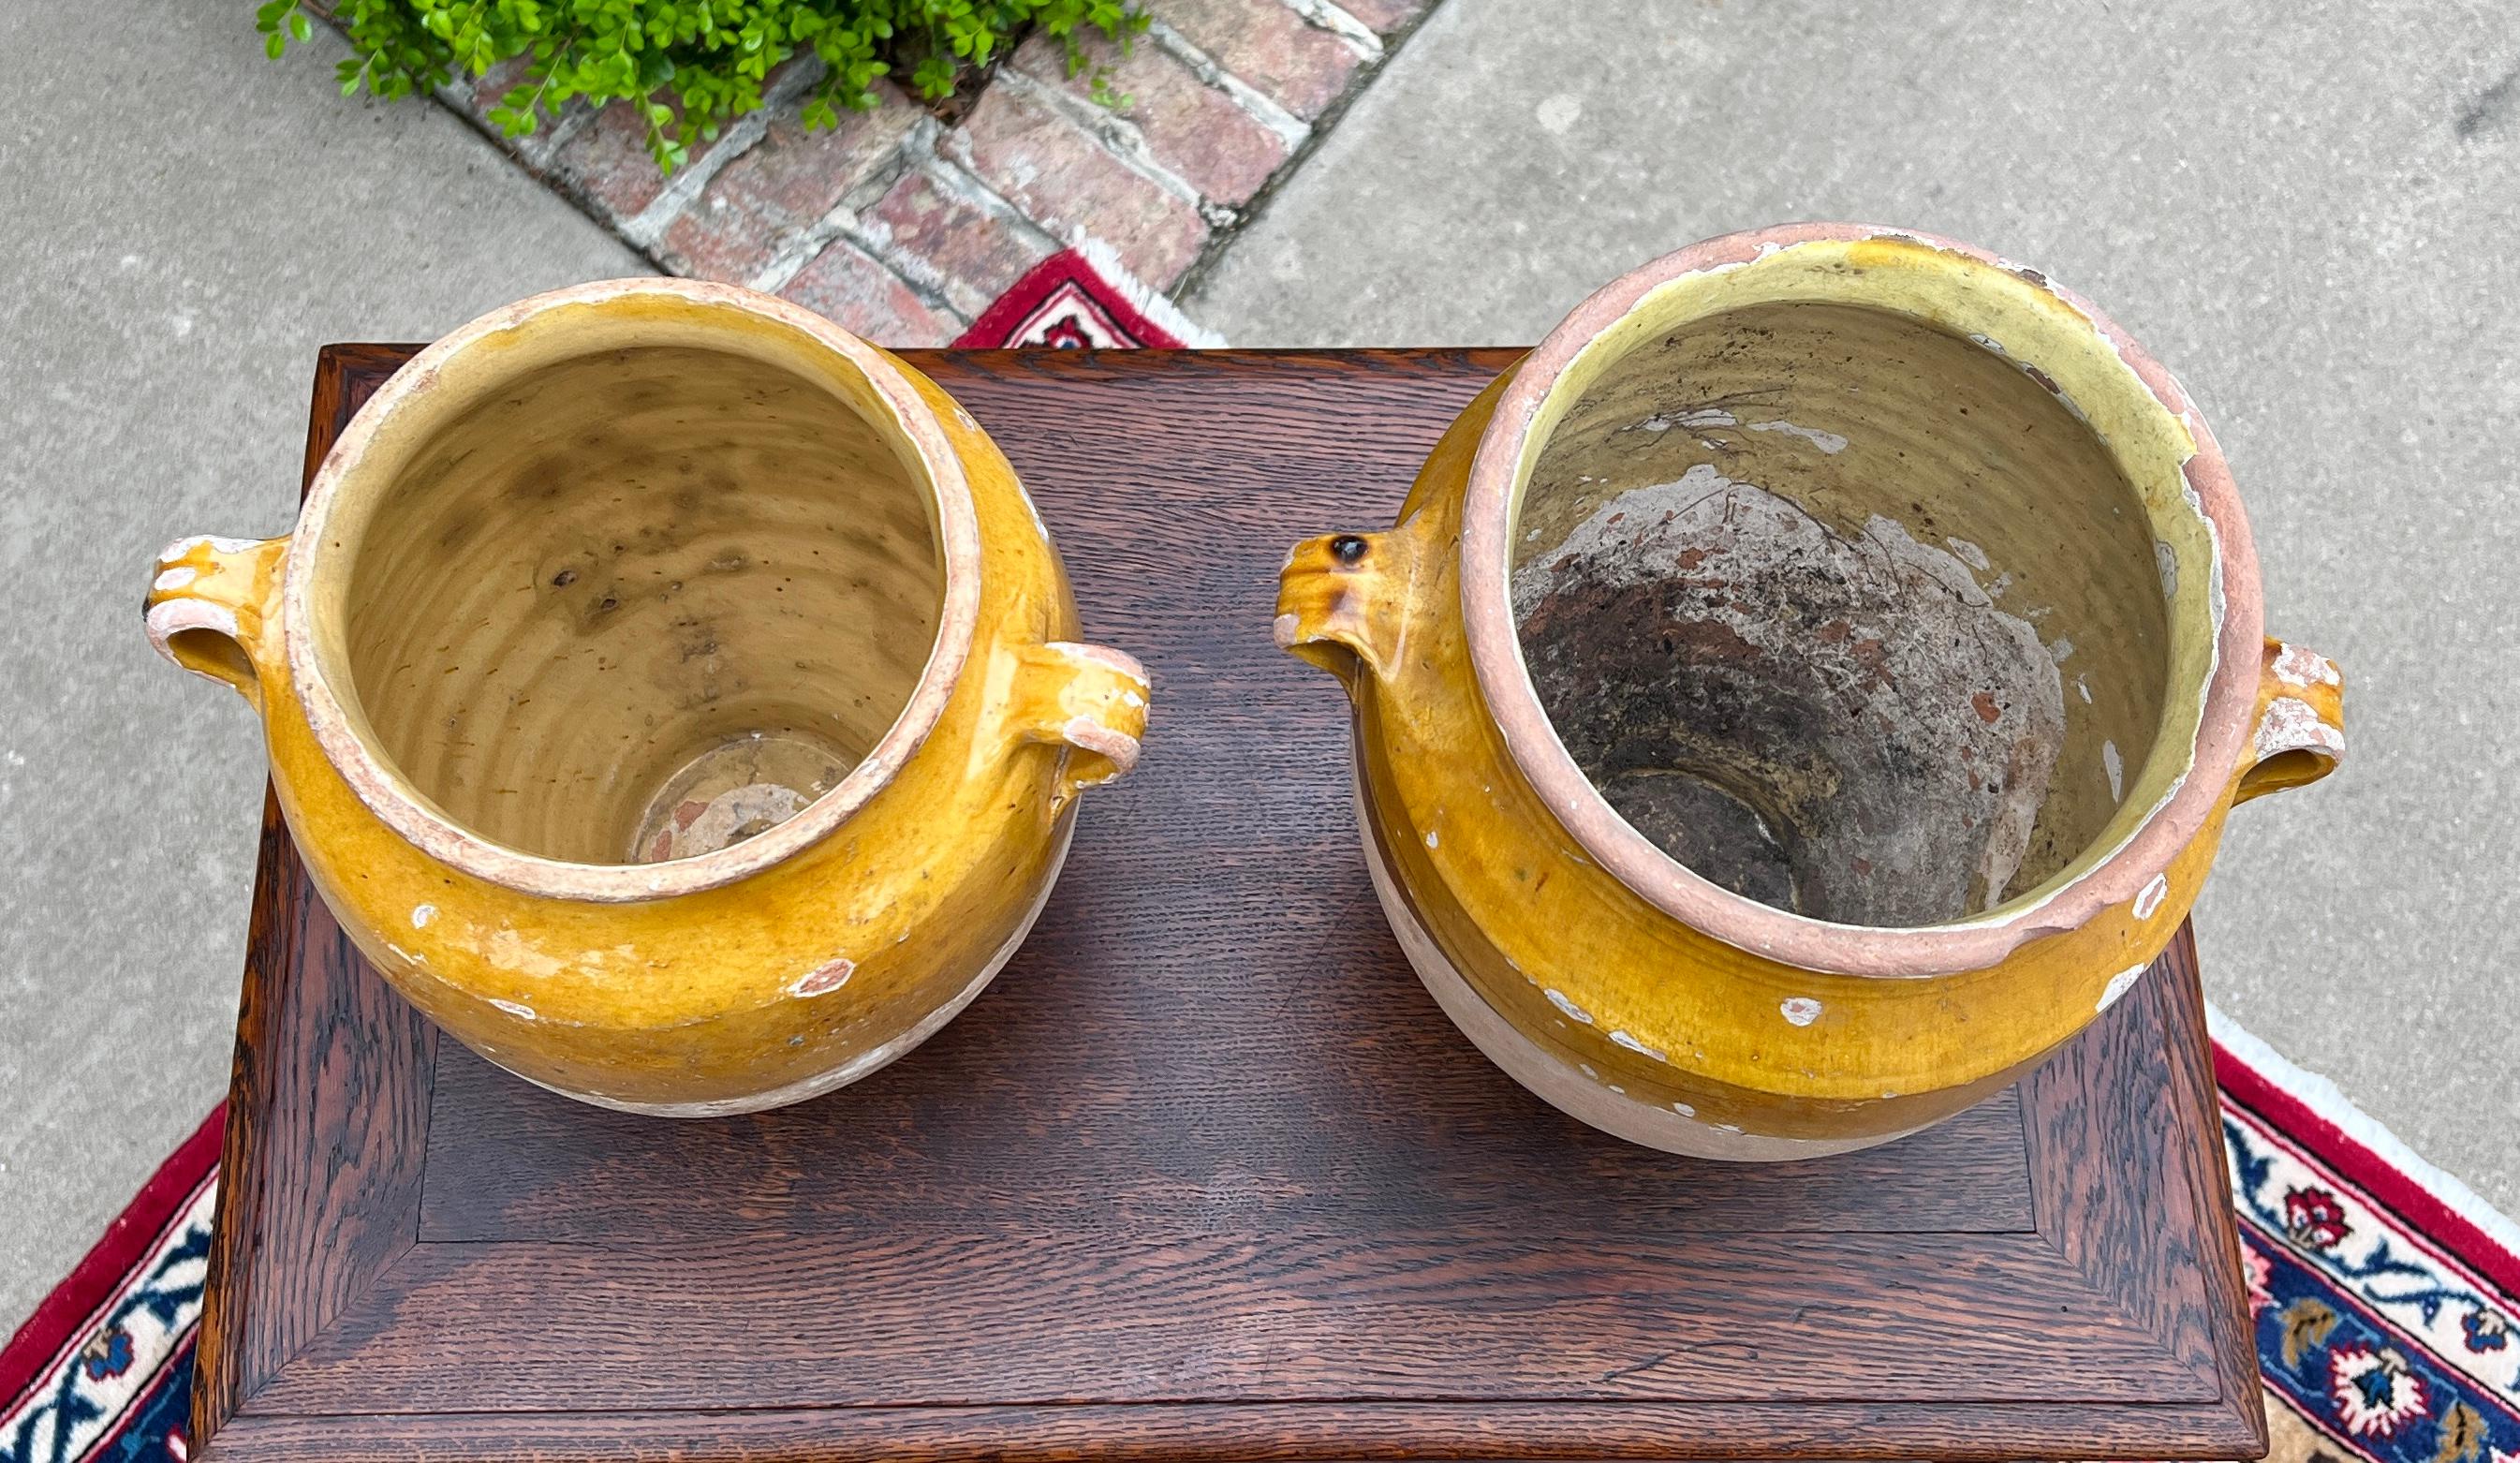  Antique French Country PAIR of Large Ochre Yellow Glazed Confit Pots Pottery Jars ~ 19th c

Striking 19th century confit pots directly from the south of France~~eye-catching yellow ochre glazing from rim to mid-section~~bare clay with nice aged